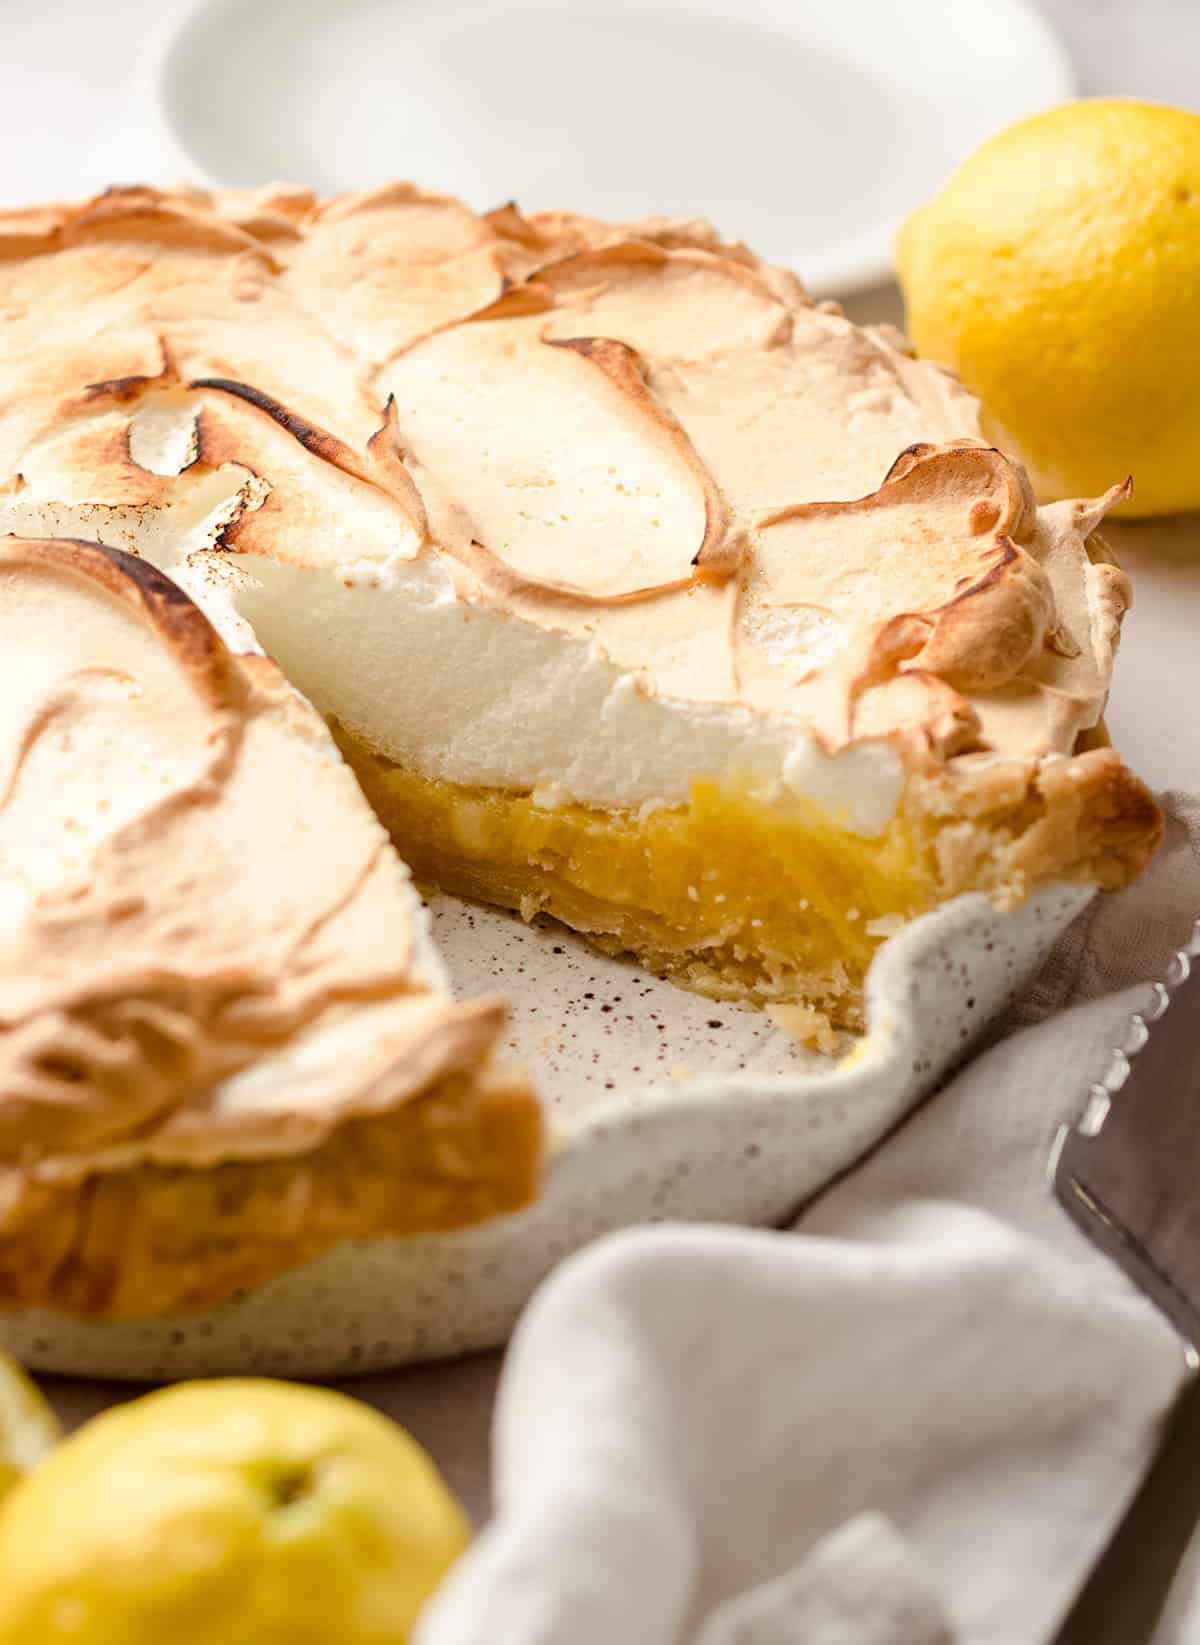 A lemon meringue pie with a slice removed